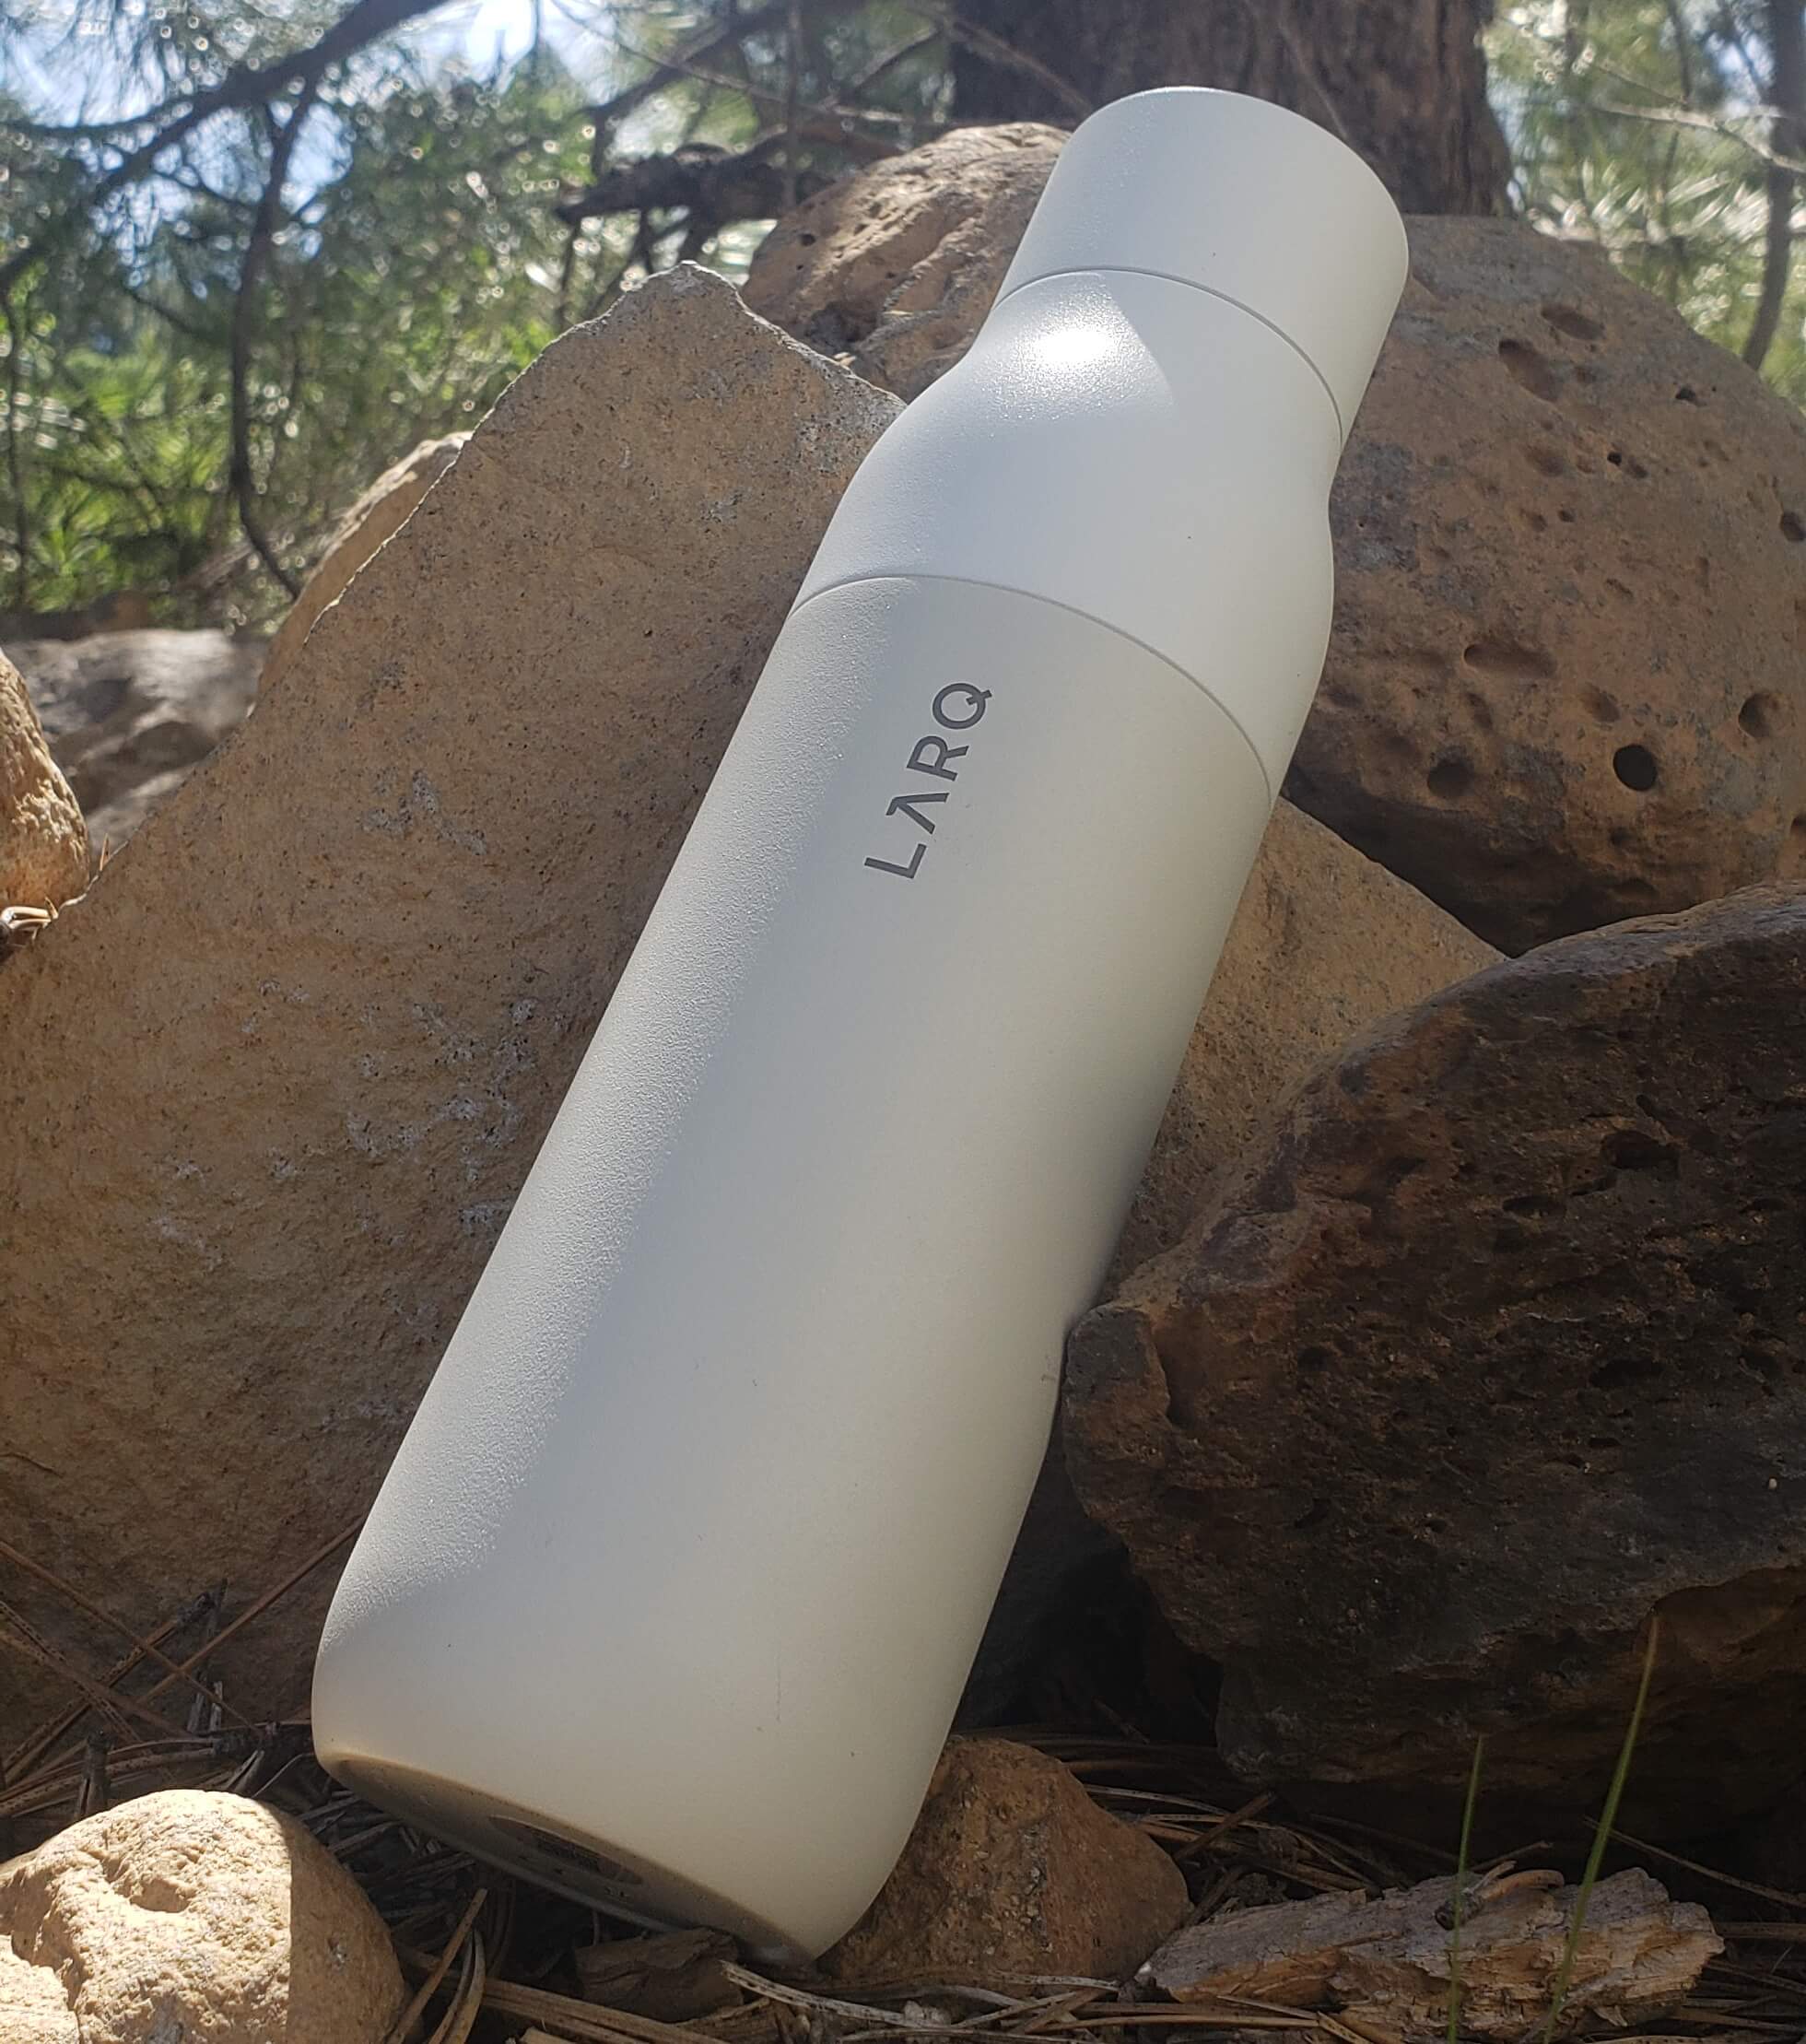 LARQ is the World's First Self-Cleaning Water Bottle & Purifier